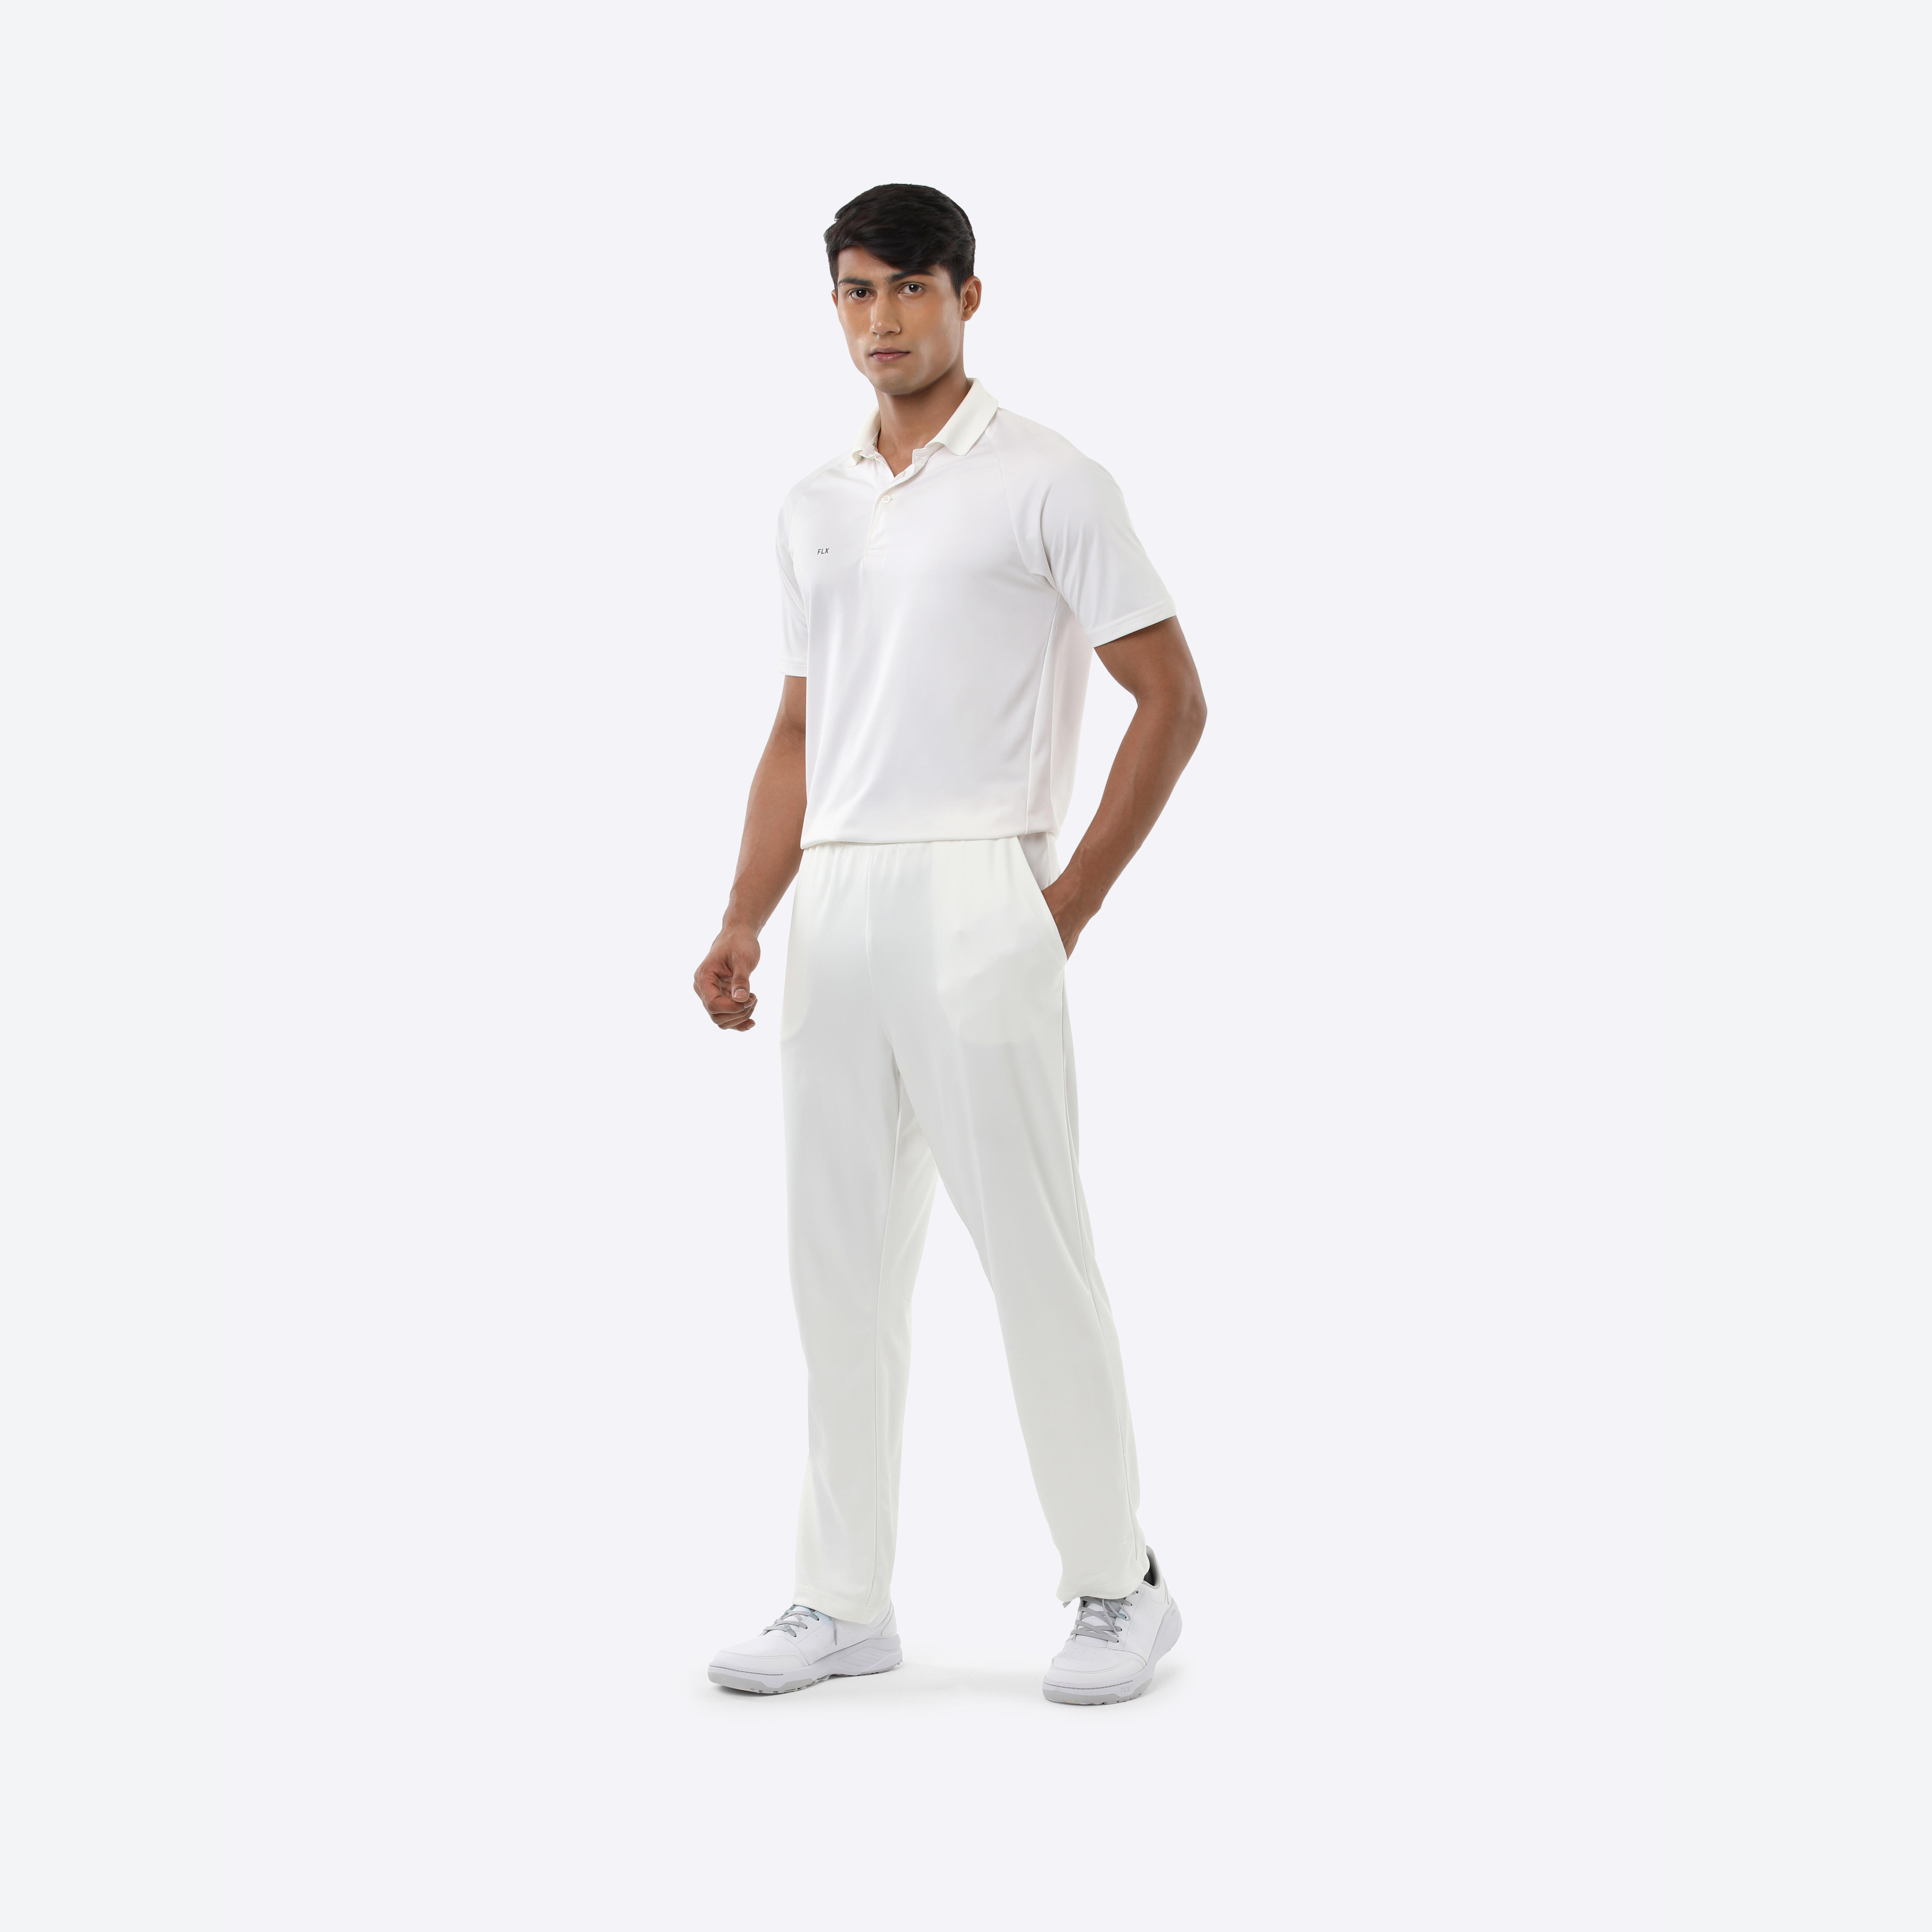 ZCFZJW Men's 2 Piece Tracksuits Outfits-Casual Long Sleeve Quarter Zip  Lapel V Neck Sweatsuits Set Sport Running Elastic Drawstring Trousers White  M - Walmart.com